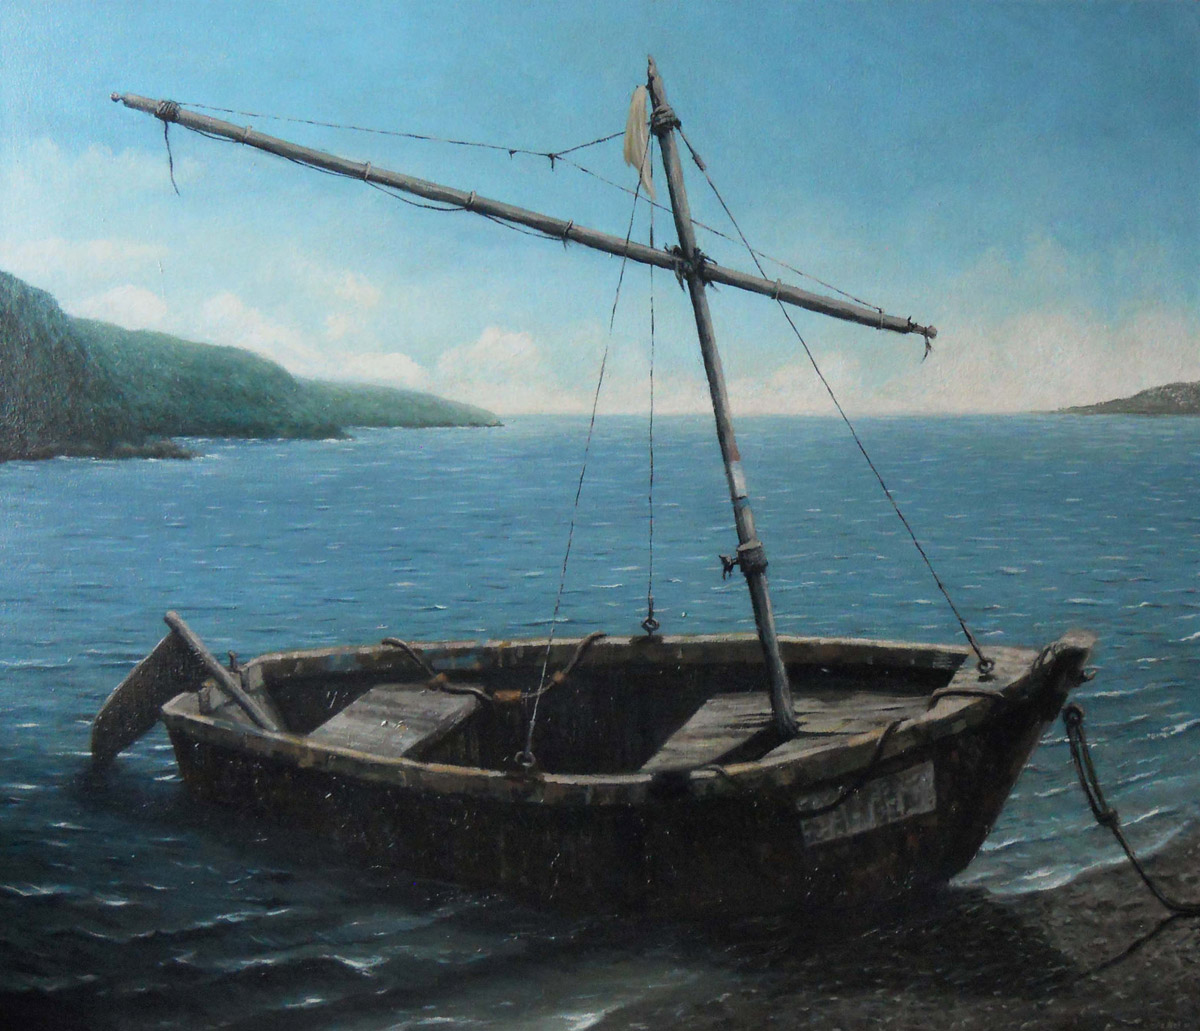 Rowboat 3 2012 Oil on canvas 100 x 80cm